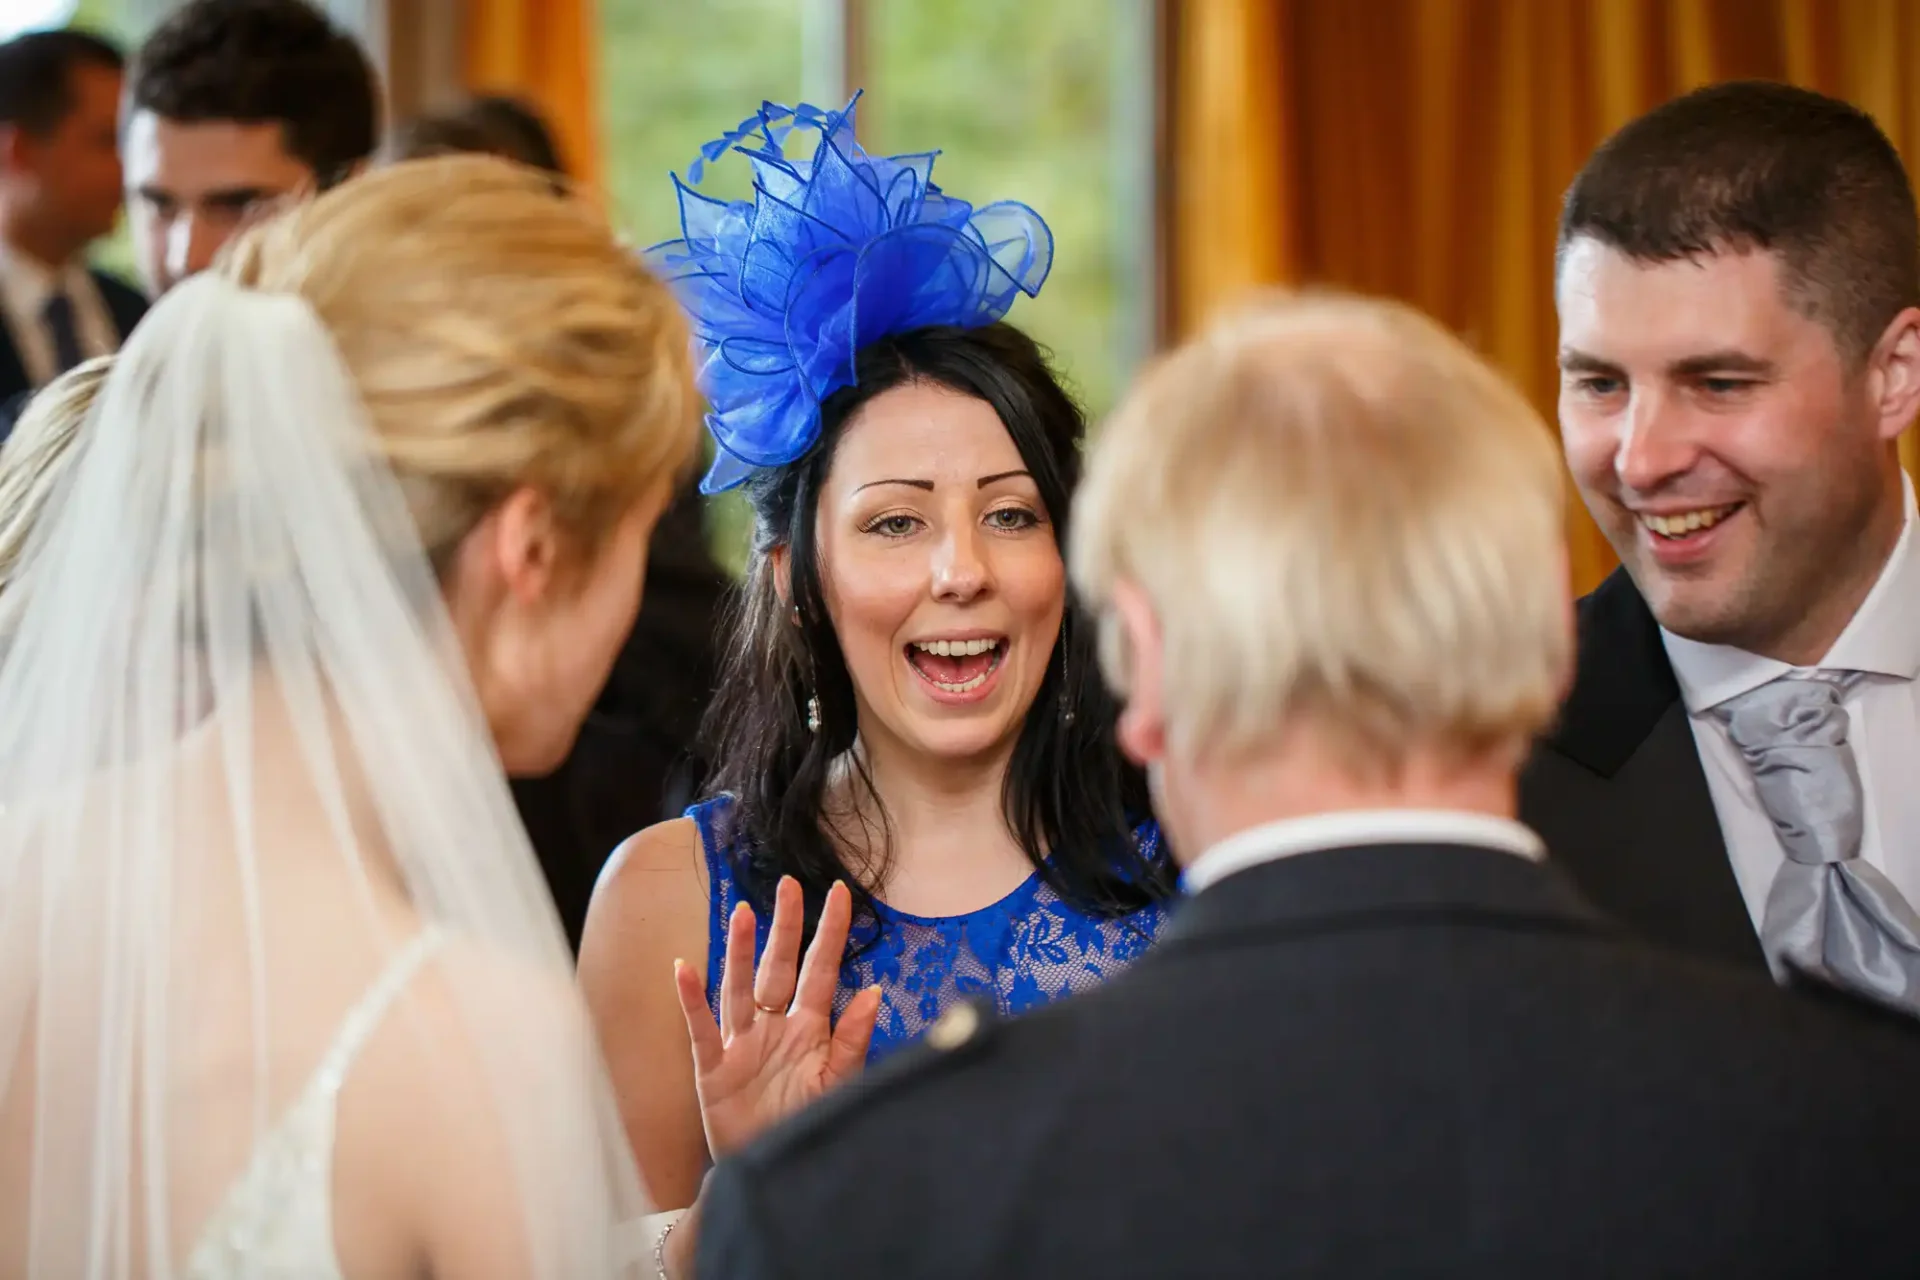 A woman in a blue dress and large blue hat laughing and talking with a bride and two men at a wedding reception.